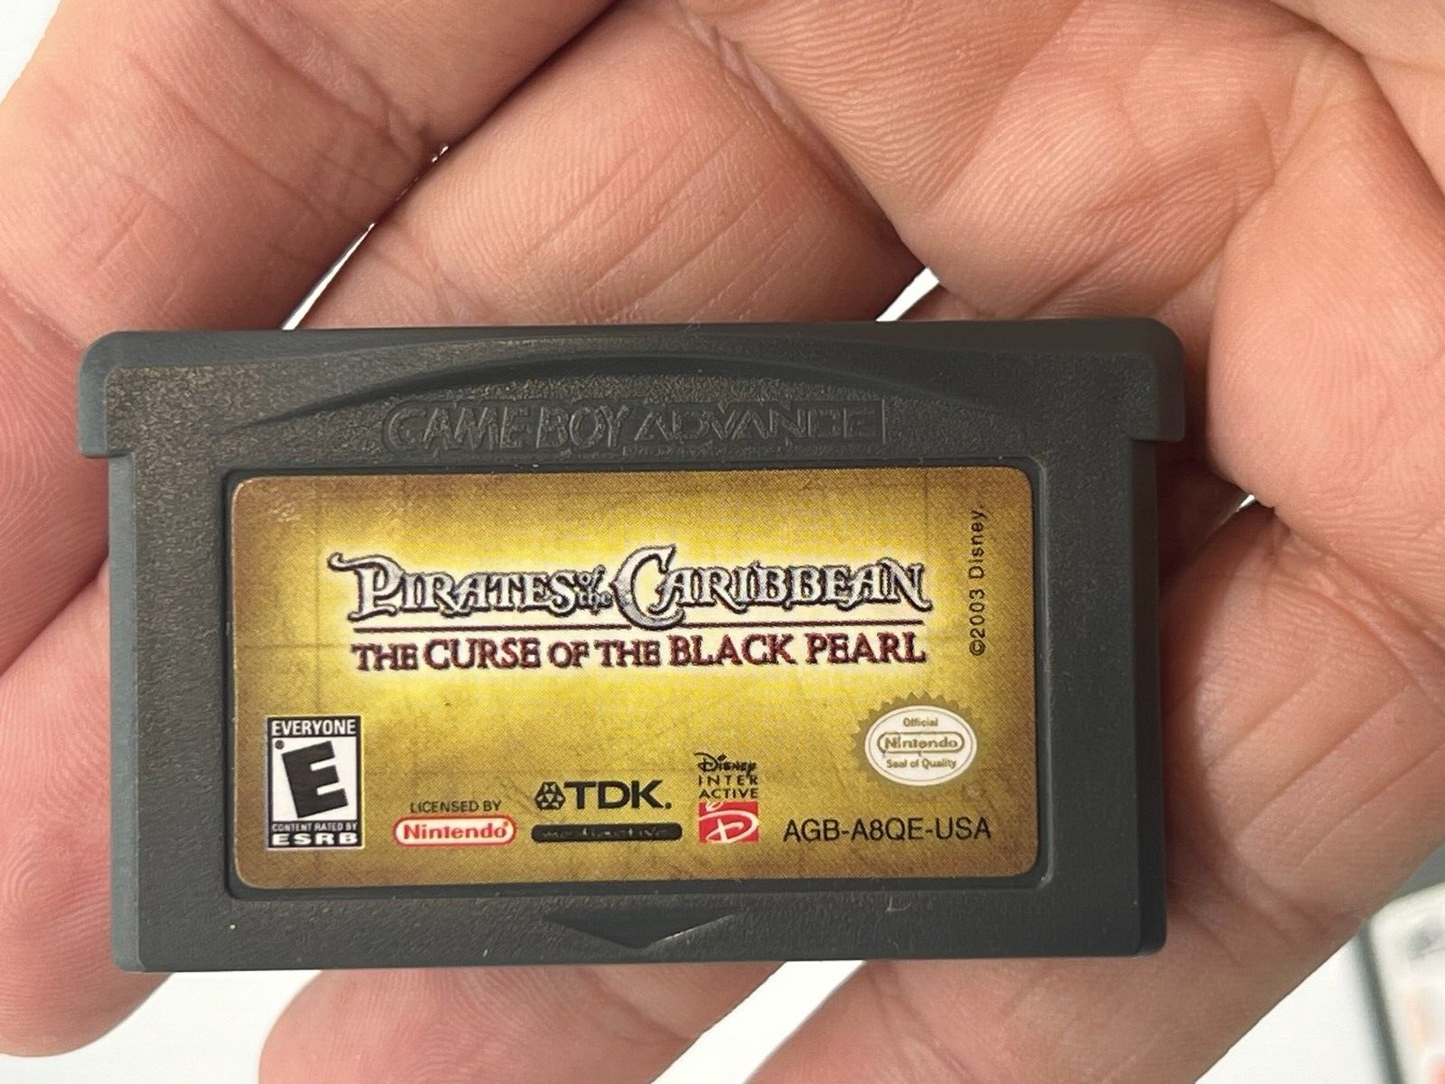 Pirates of the Caribbean: The Curse of the Black Pearl (Game Boy Advance, 2003)